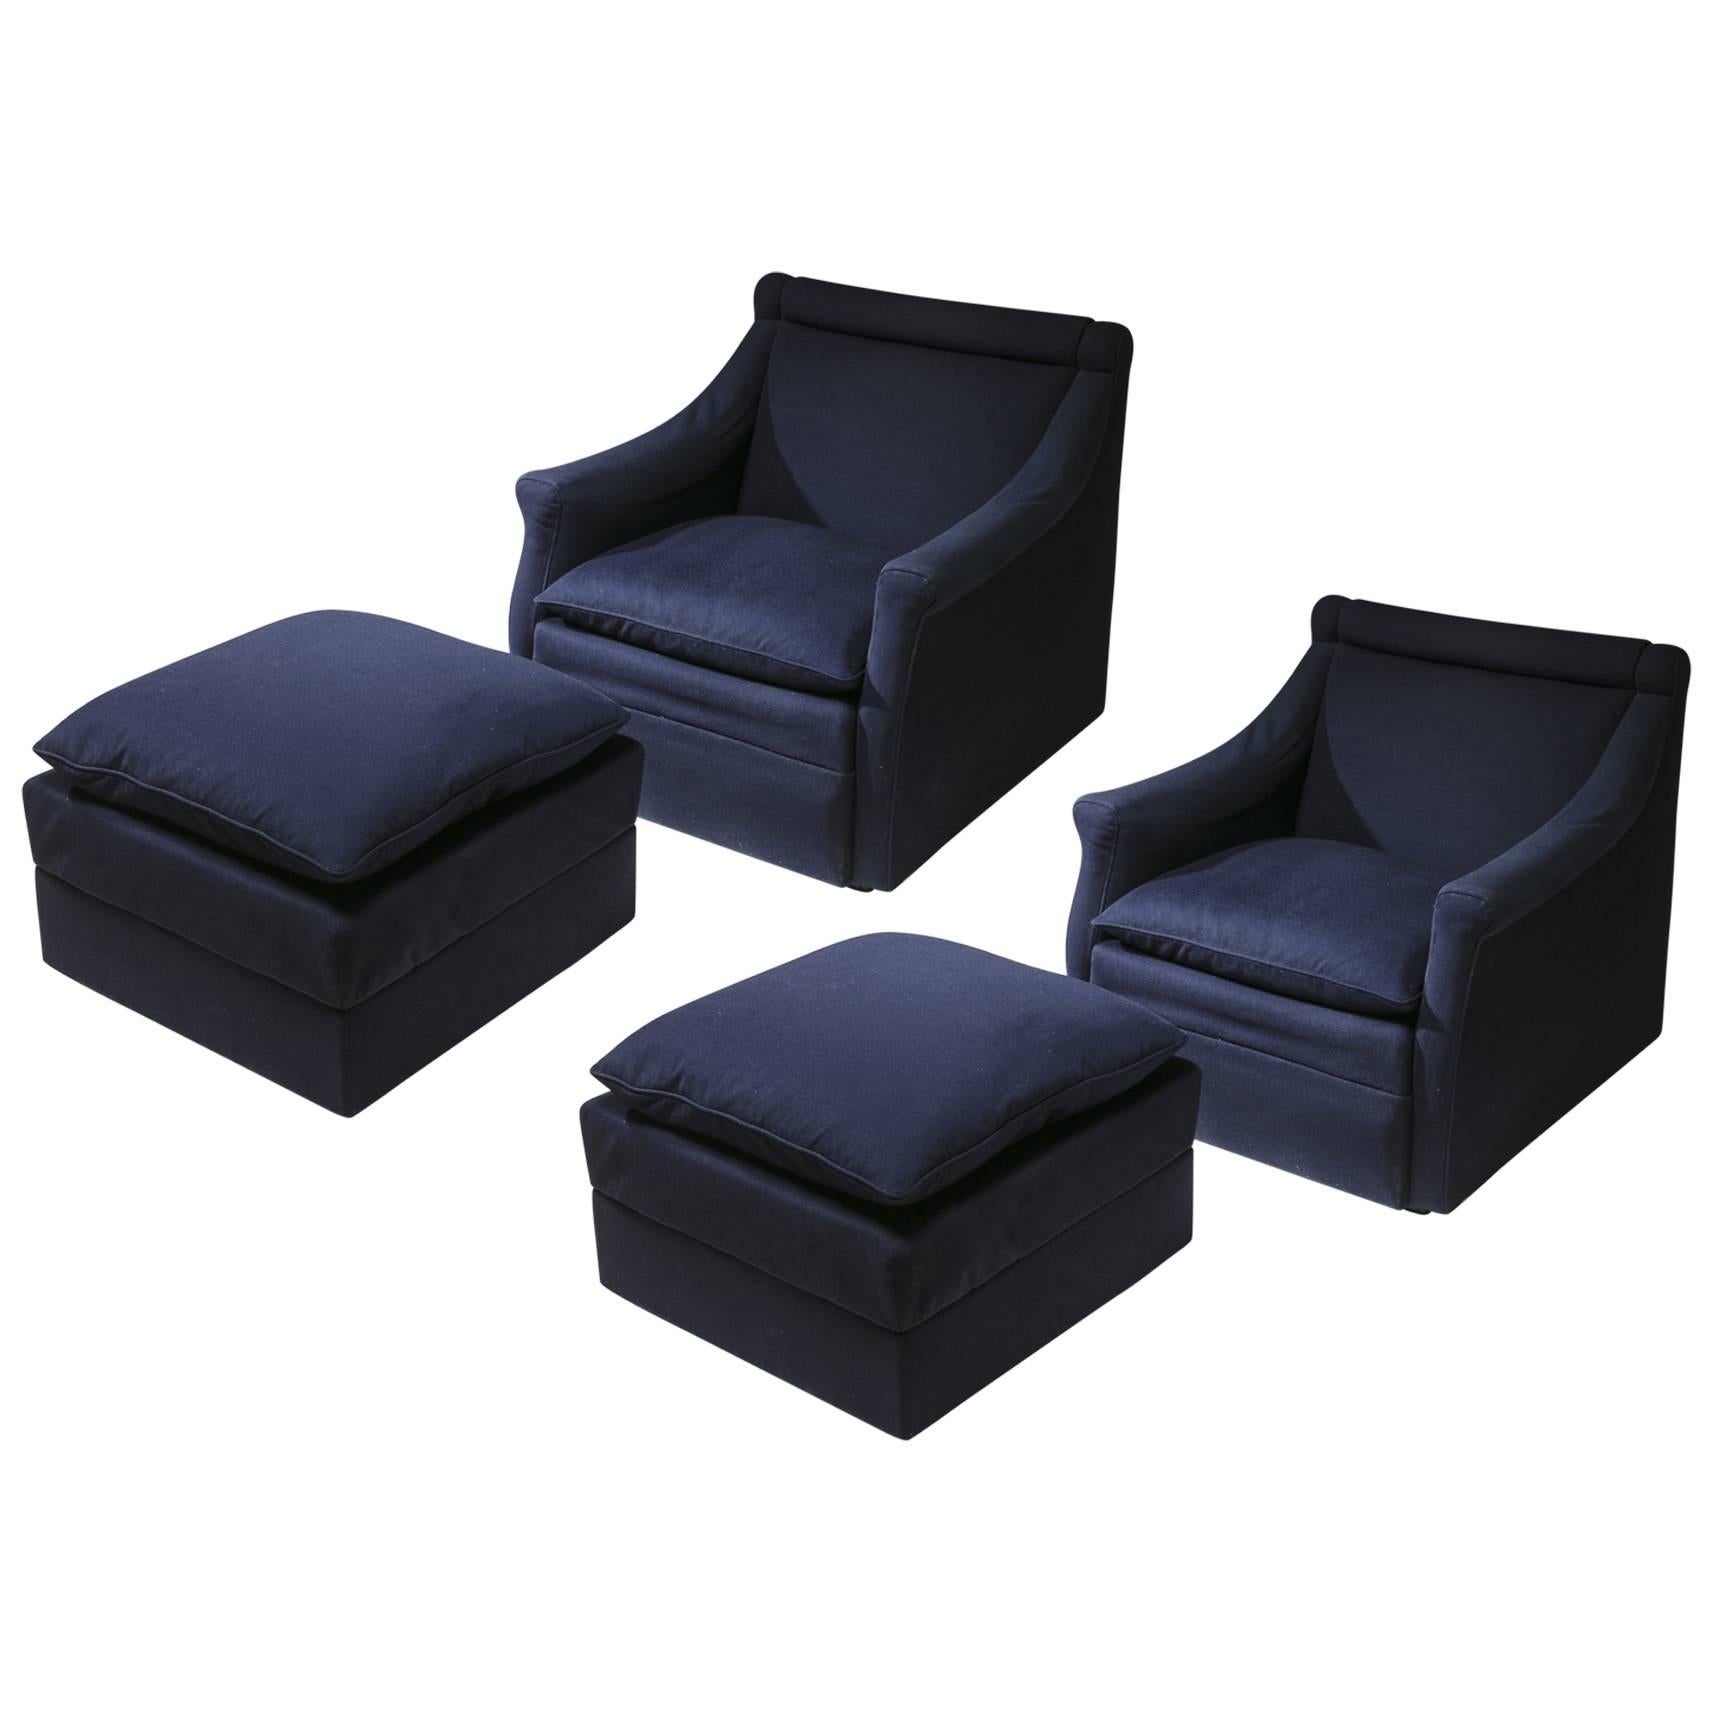 Pair of "San Siro" Lounge Chairs with Ottomans by Caccia Dominioni for Azucena